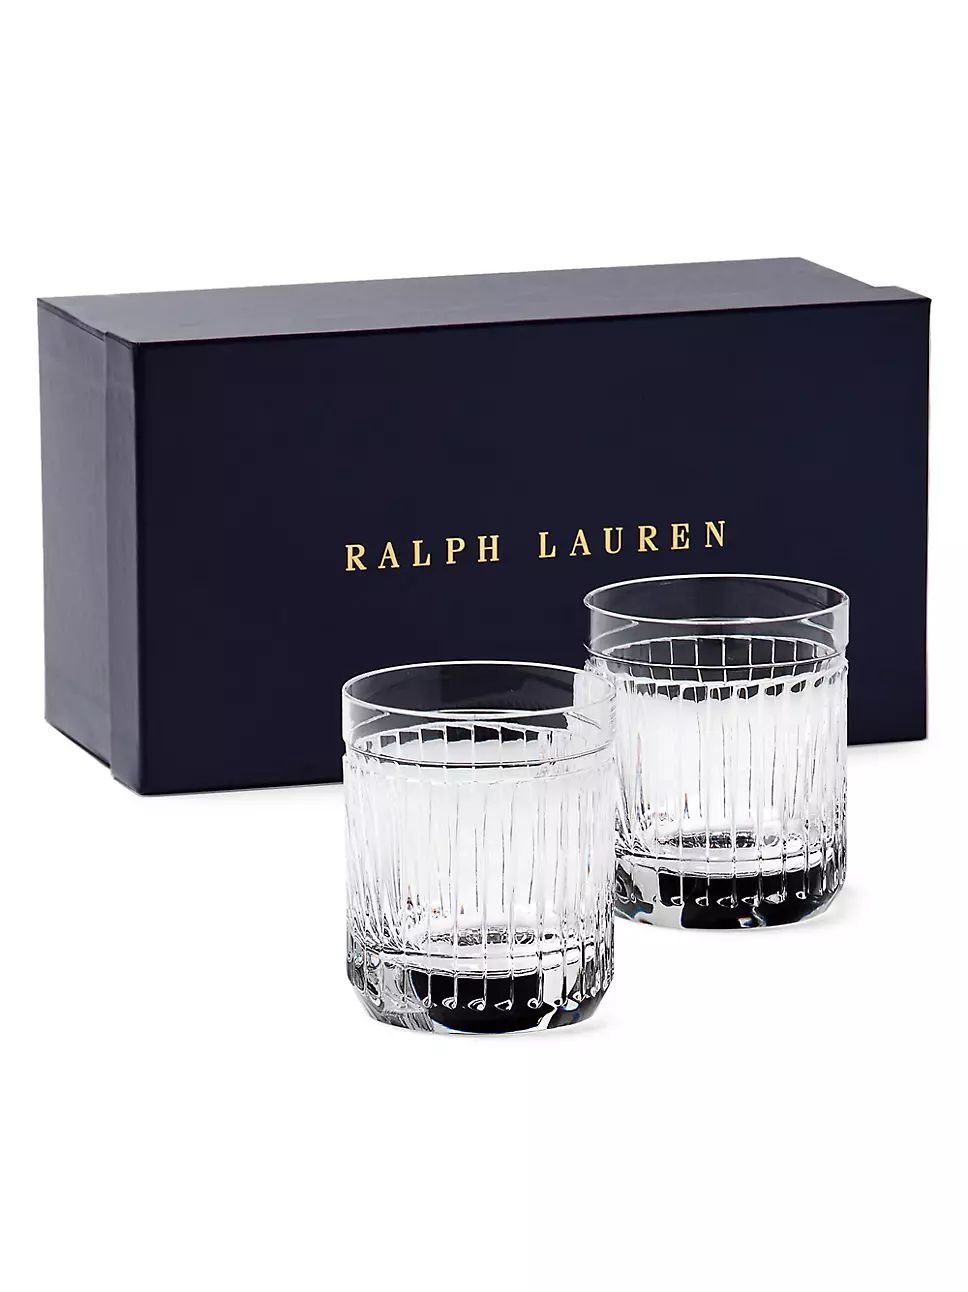 Stirling 2-Piece Double Old-Fashioned Glass Set | Saks Fifth Avenue